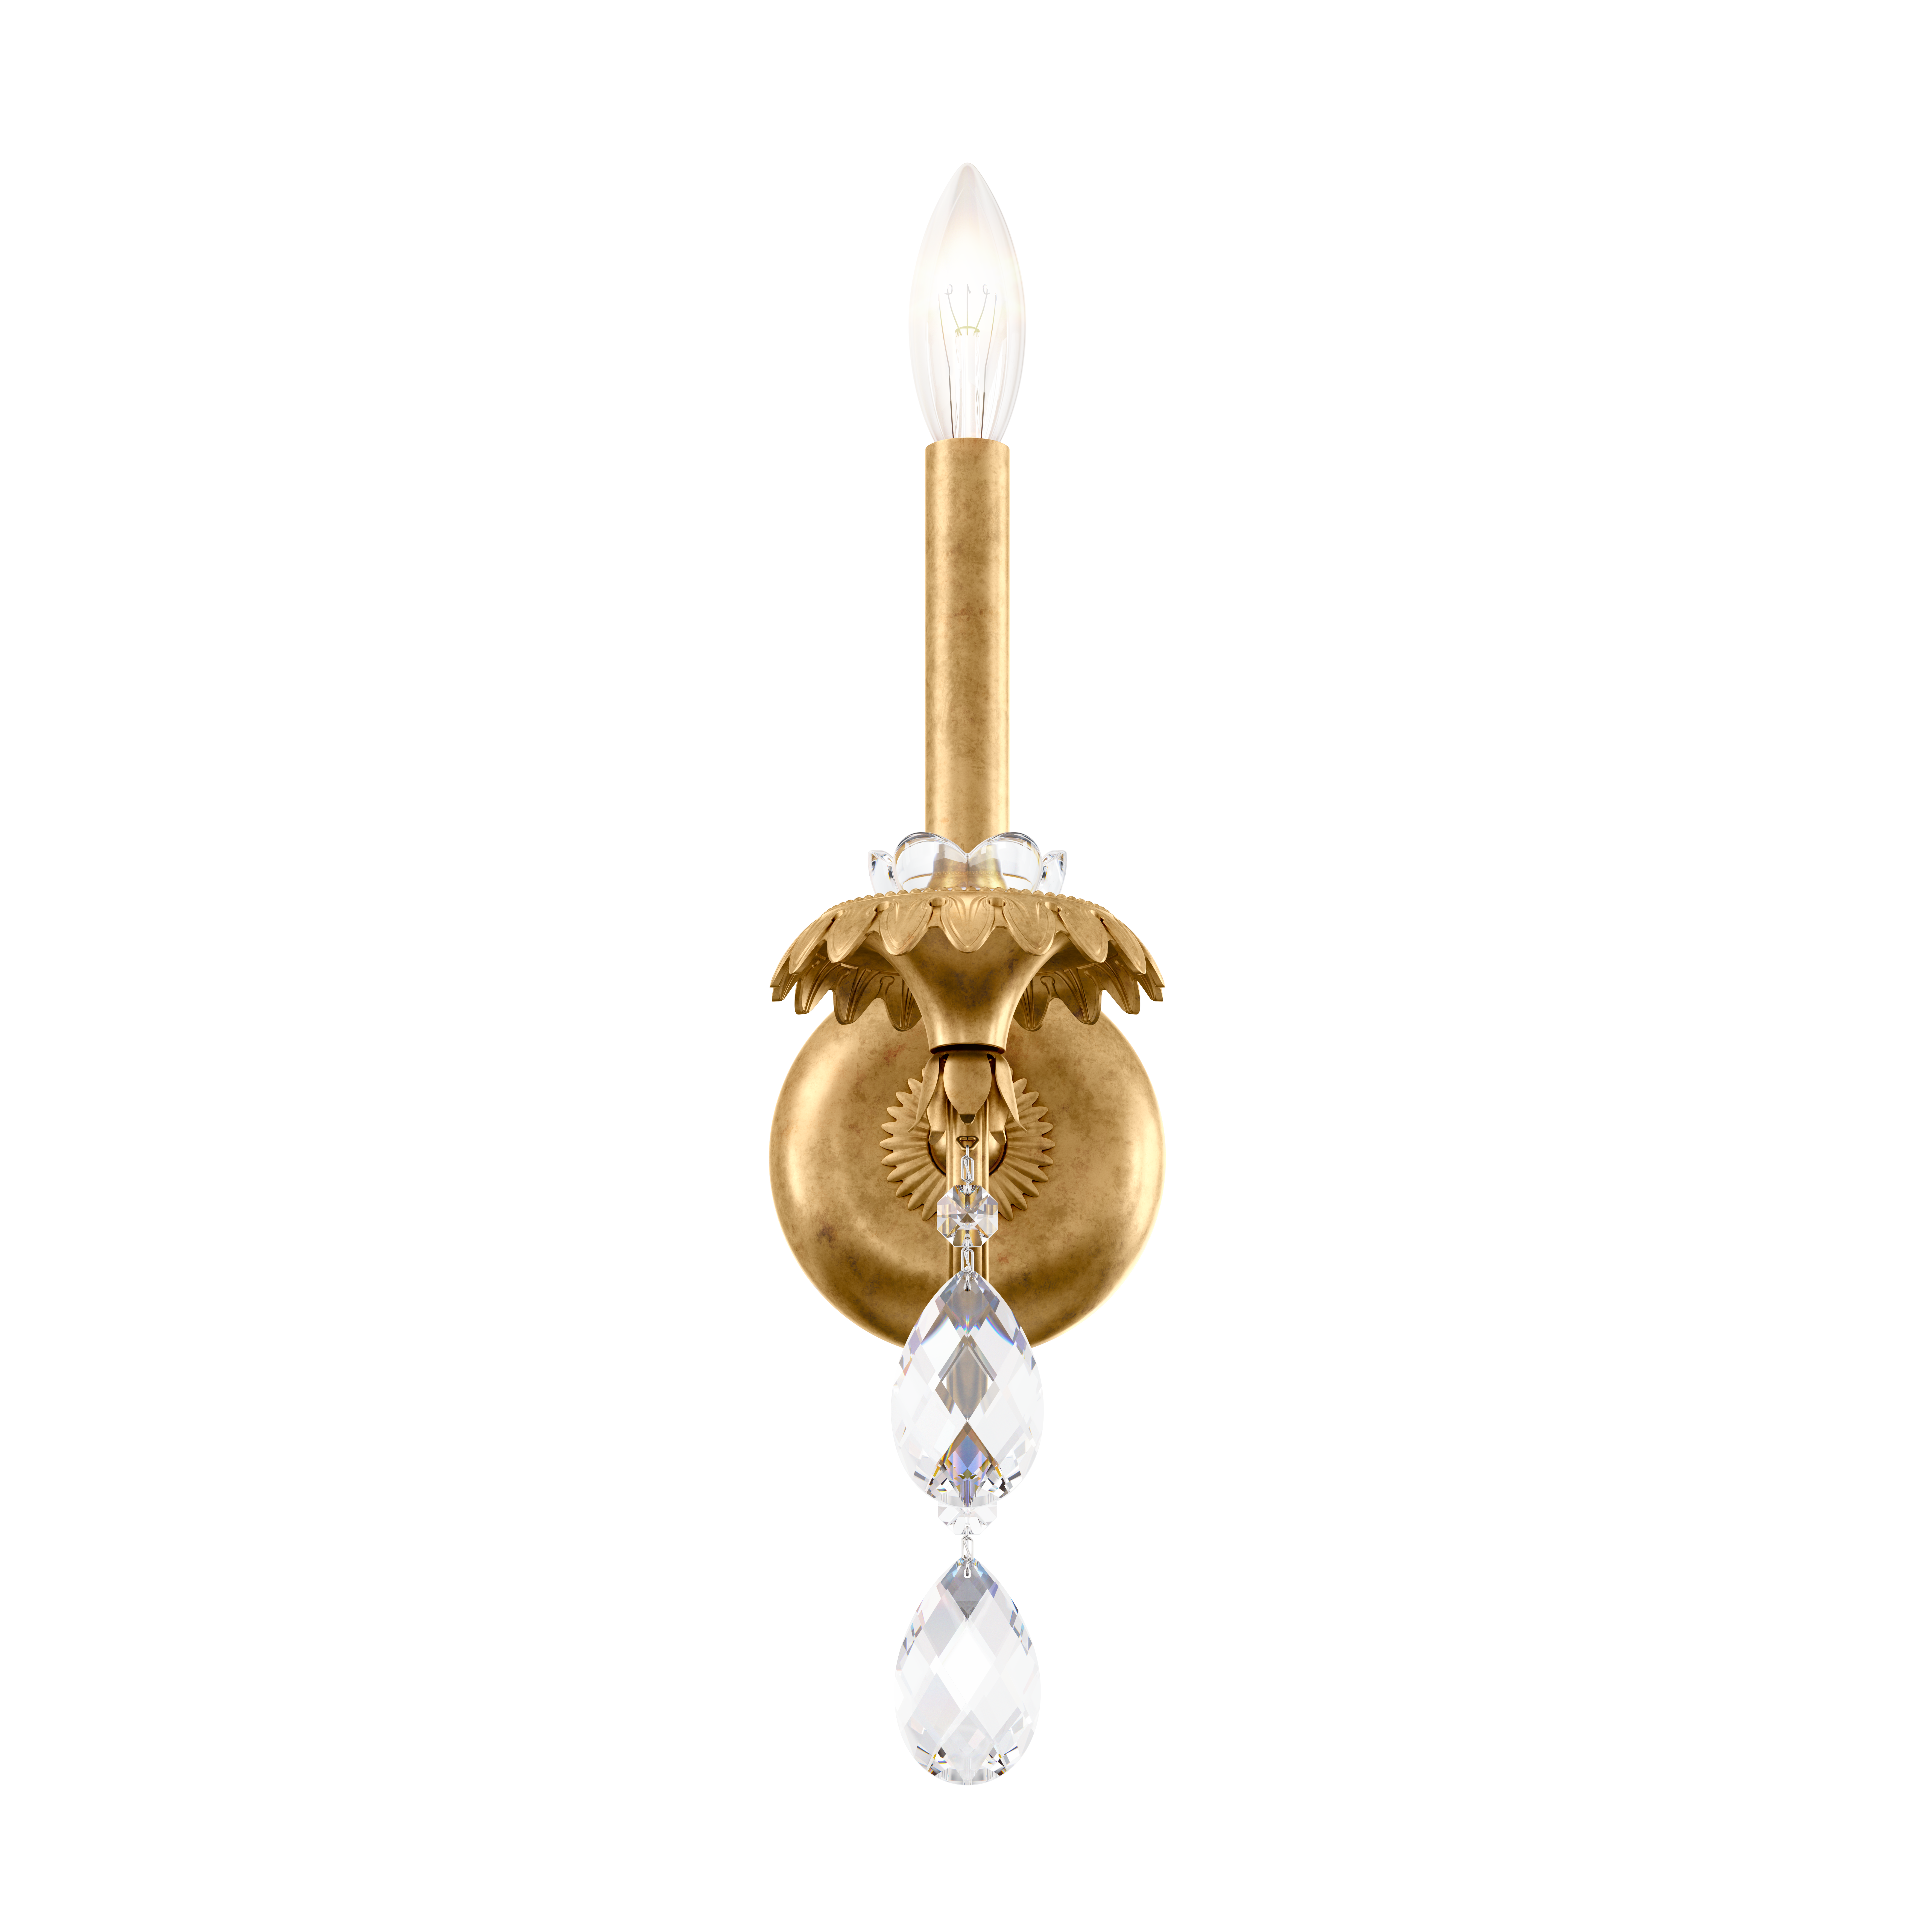 Schonbek AT1001N-22H Helenia 1 Light Traditional Sconce in Heirloom Gold with Clear Heritage Crystal